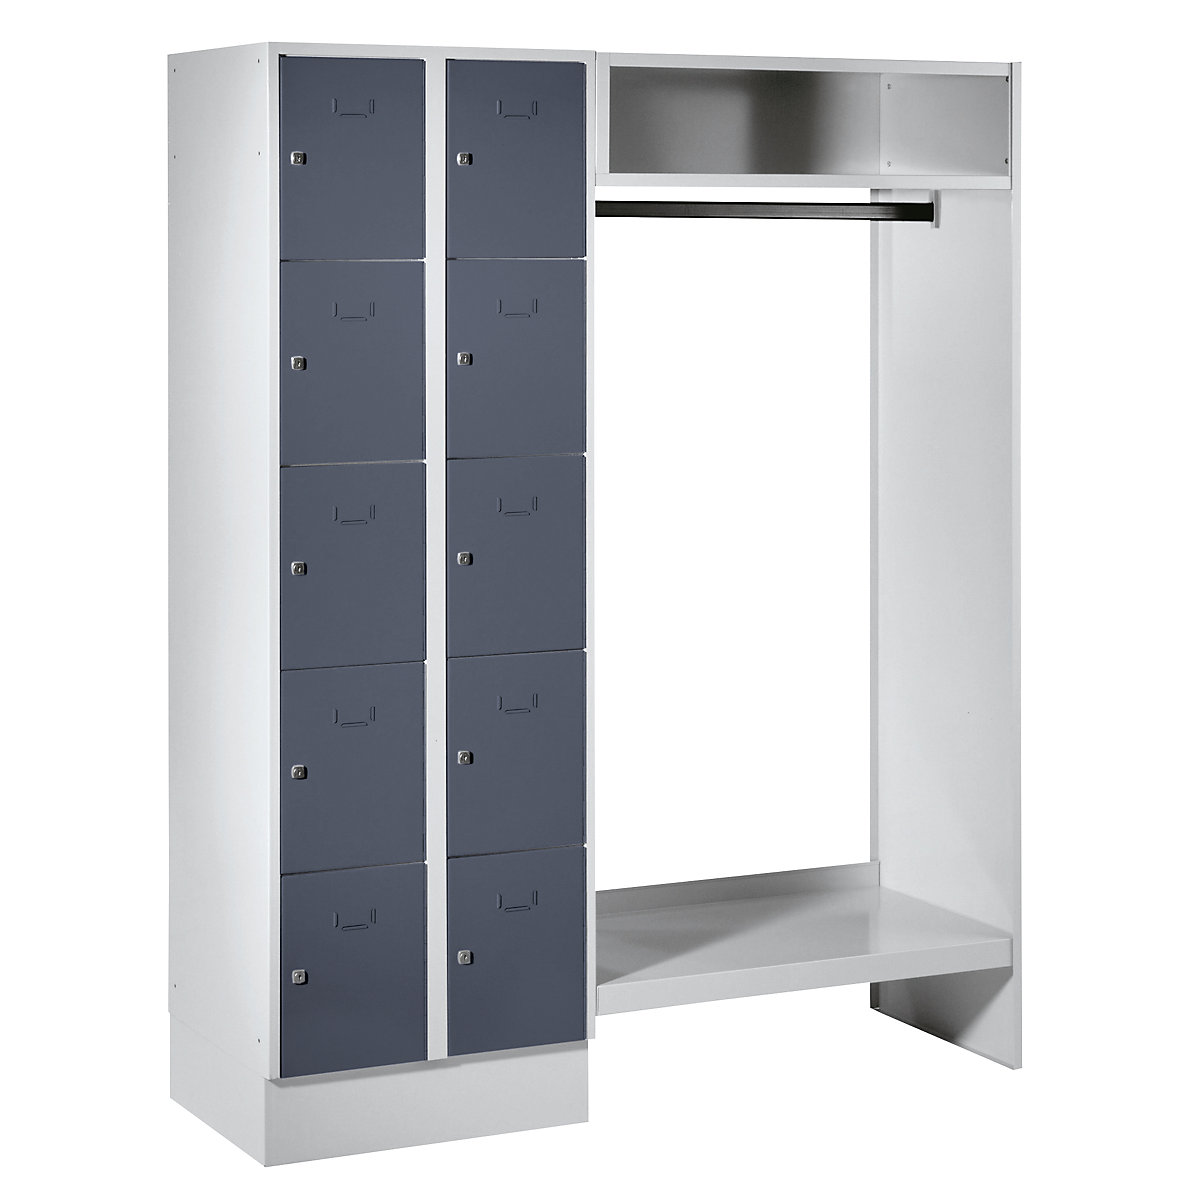 Cloakroom locker system – Wolf, 10 compartments on left, 10 coat hangers, overall width 1470 mm, compartment width 298 mm, basalt grey/light grey-12